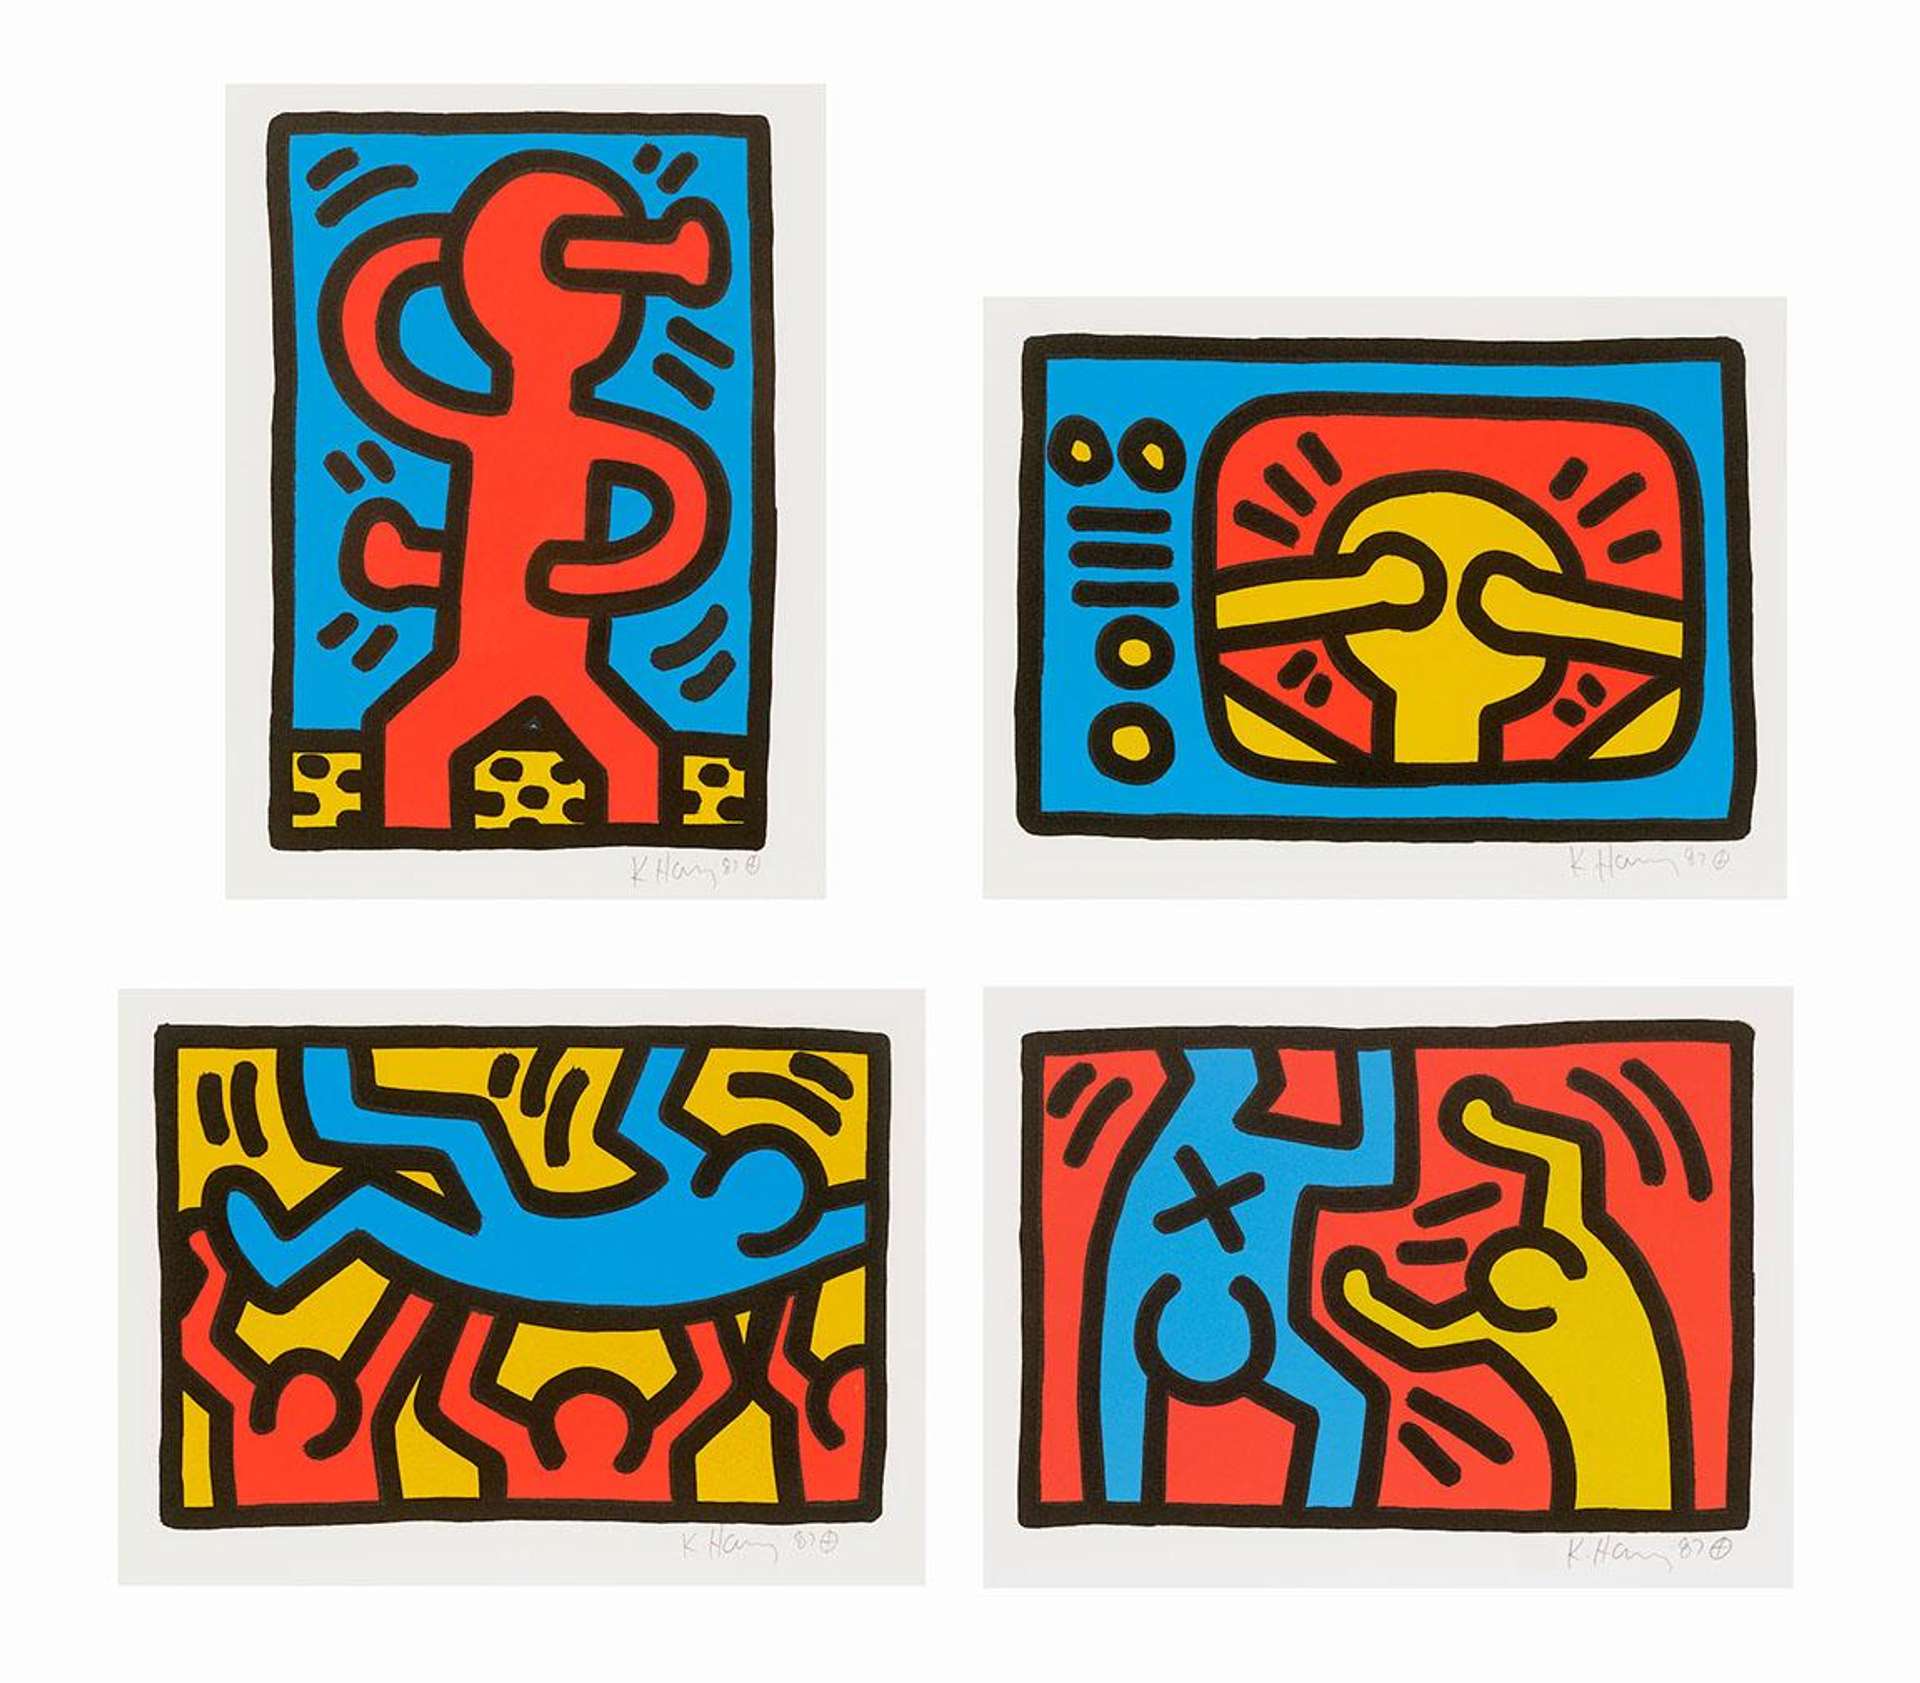 Untitled 1987 (complete set) - Signed Print by Keith Haring 1987 - MyArtBroker